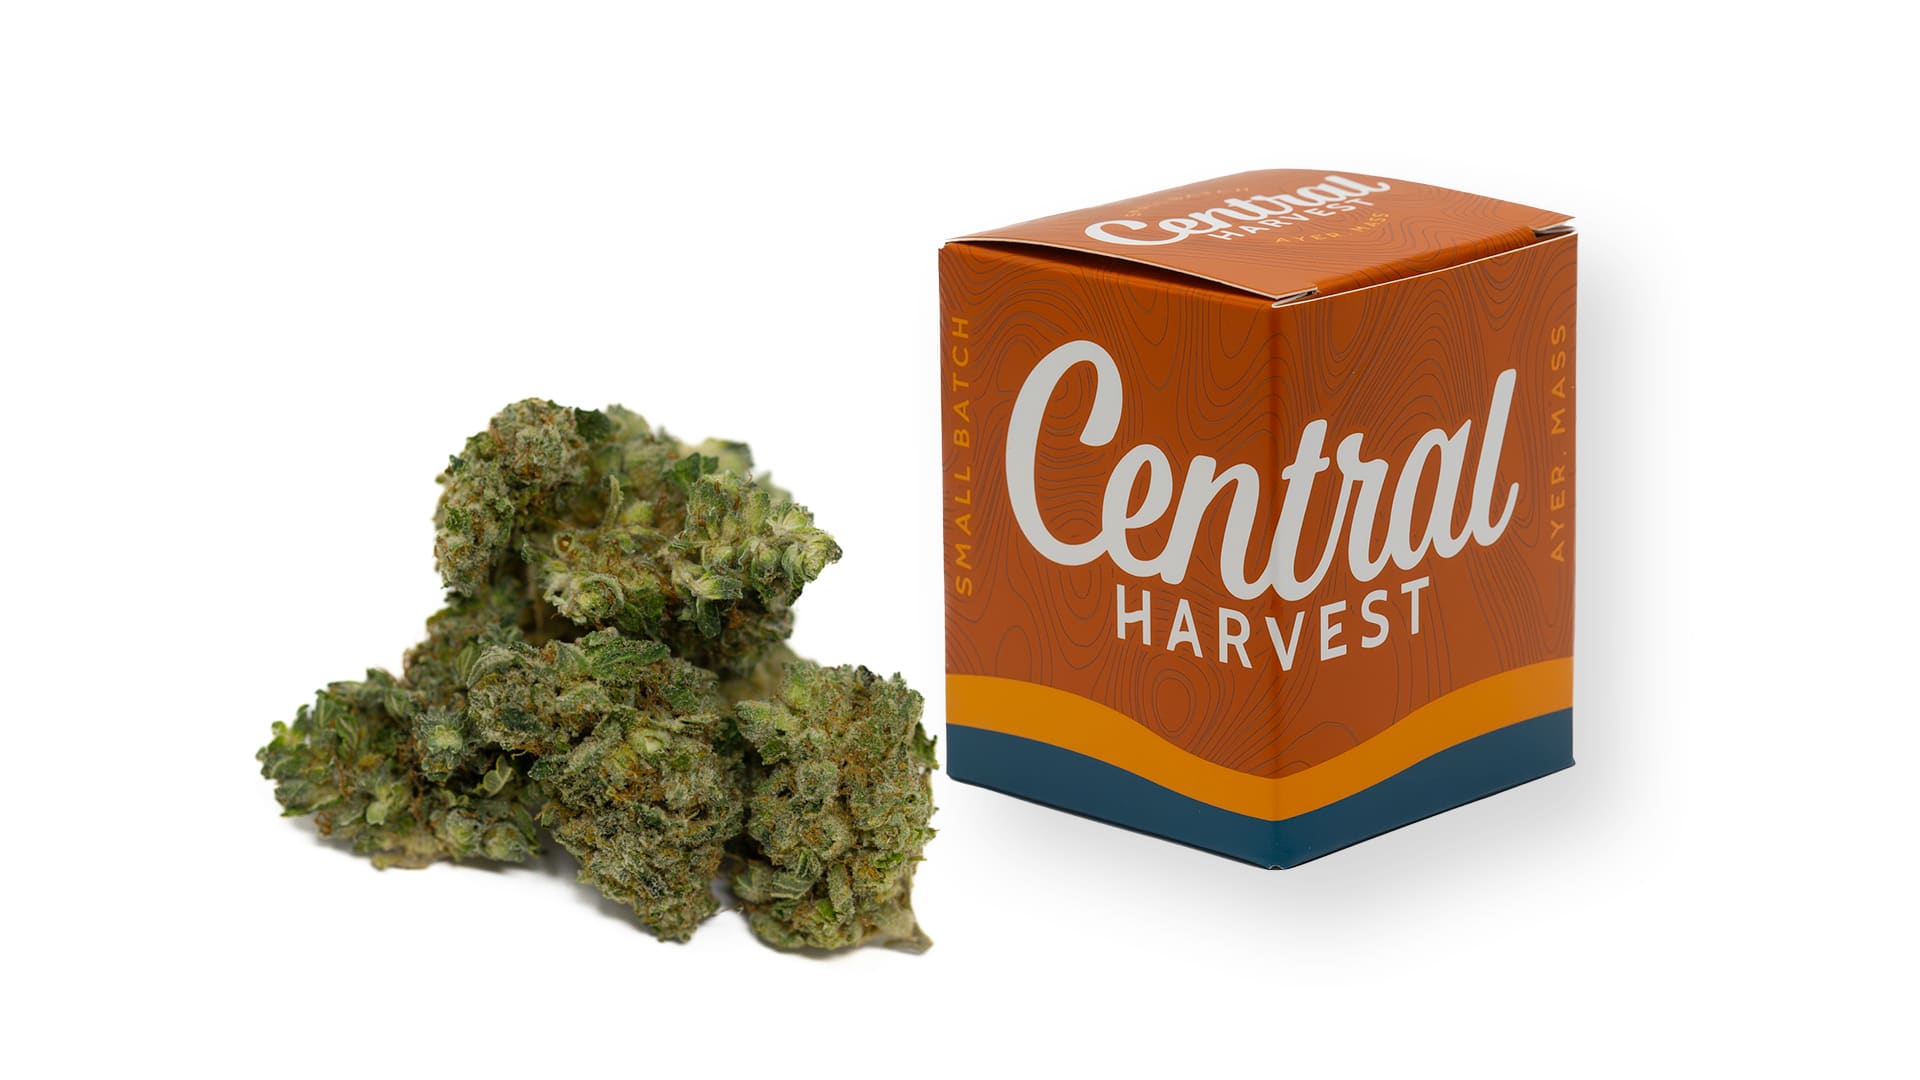 Pound Cake is a Hybrid Cannabis Strain grown by Central Harvest